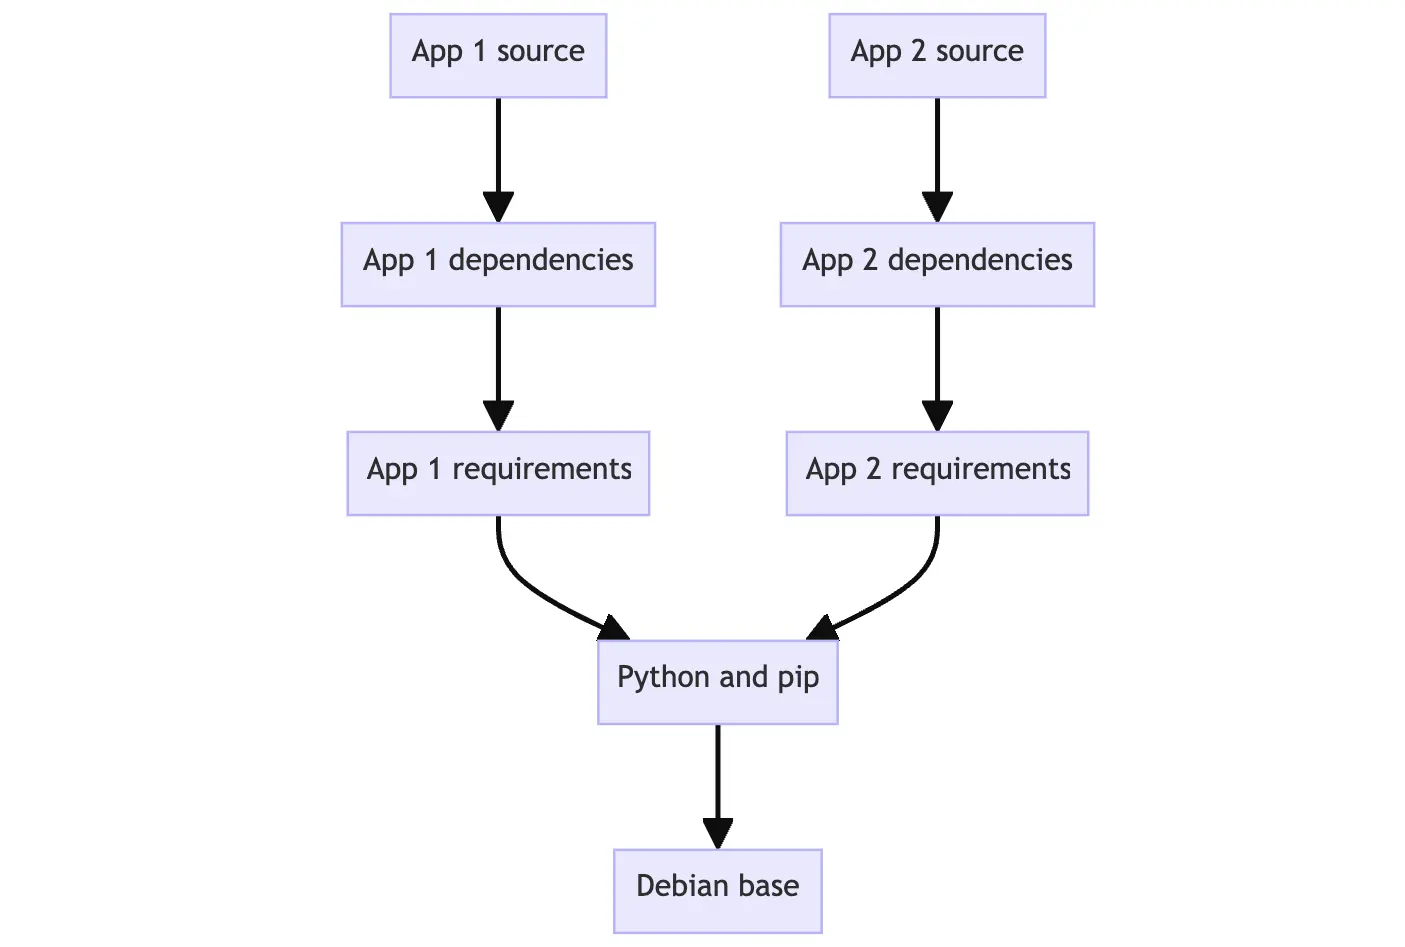 screenshot of the flowchart showing the benefits of the image layering